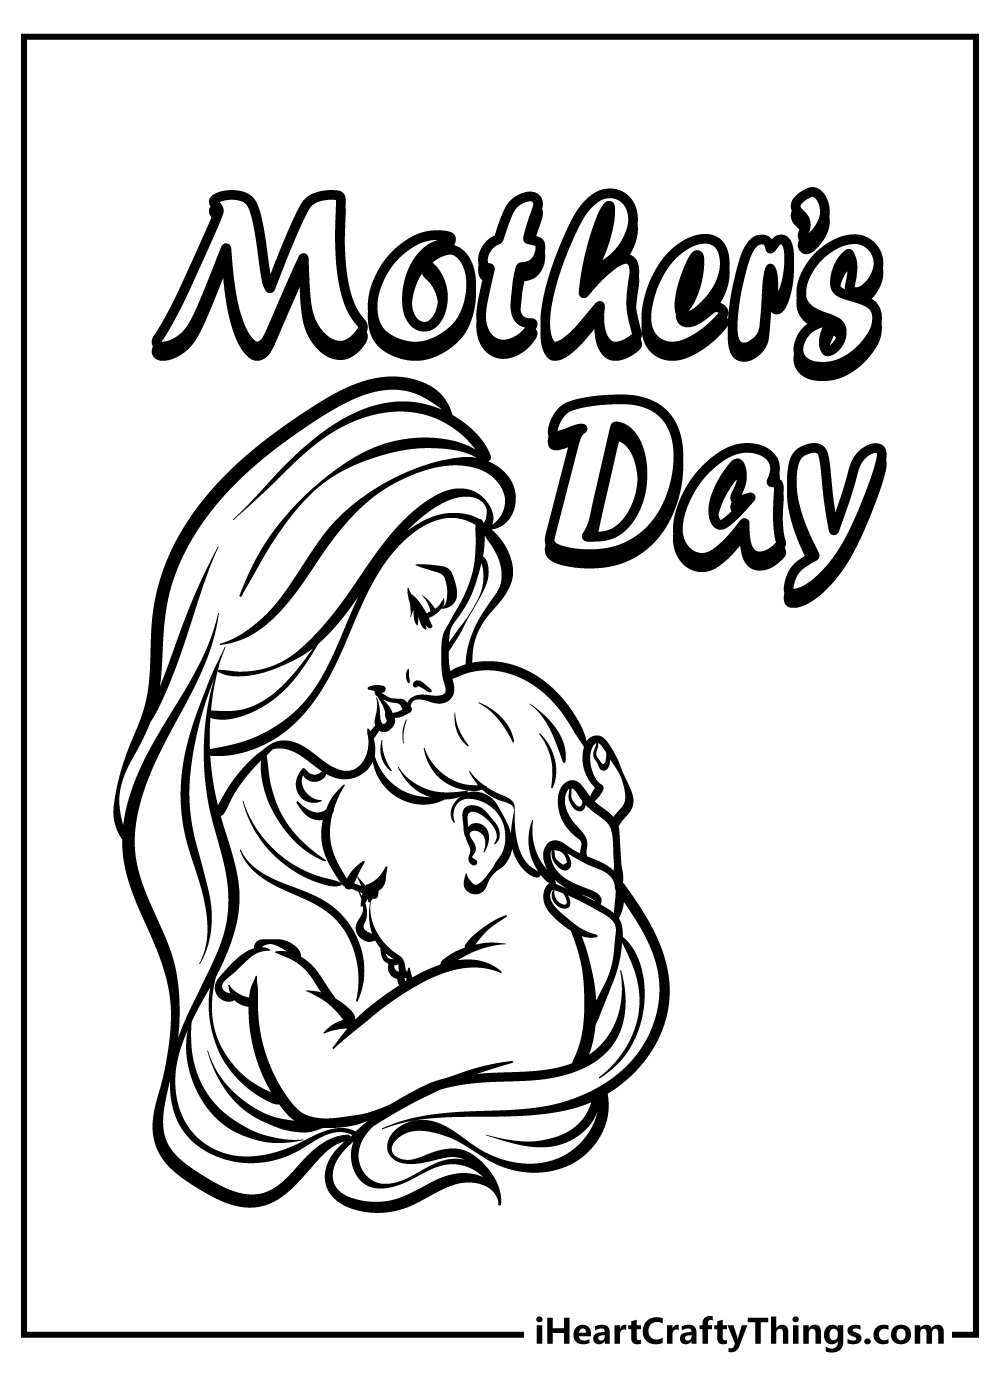 Mother's day drawing | mothers day poster drawing | mothers day drawing |  filfel design - YouTube